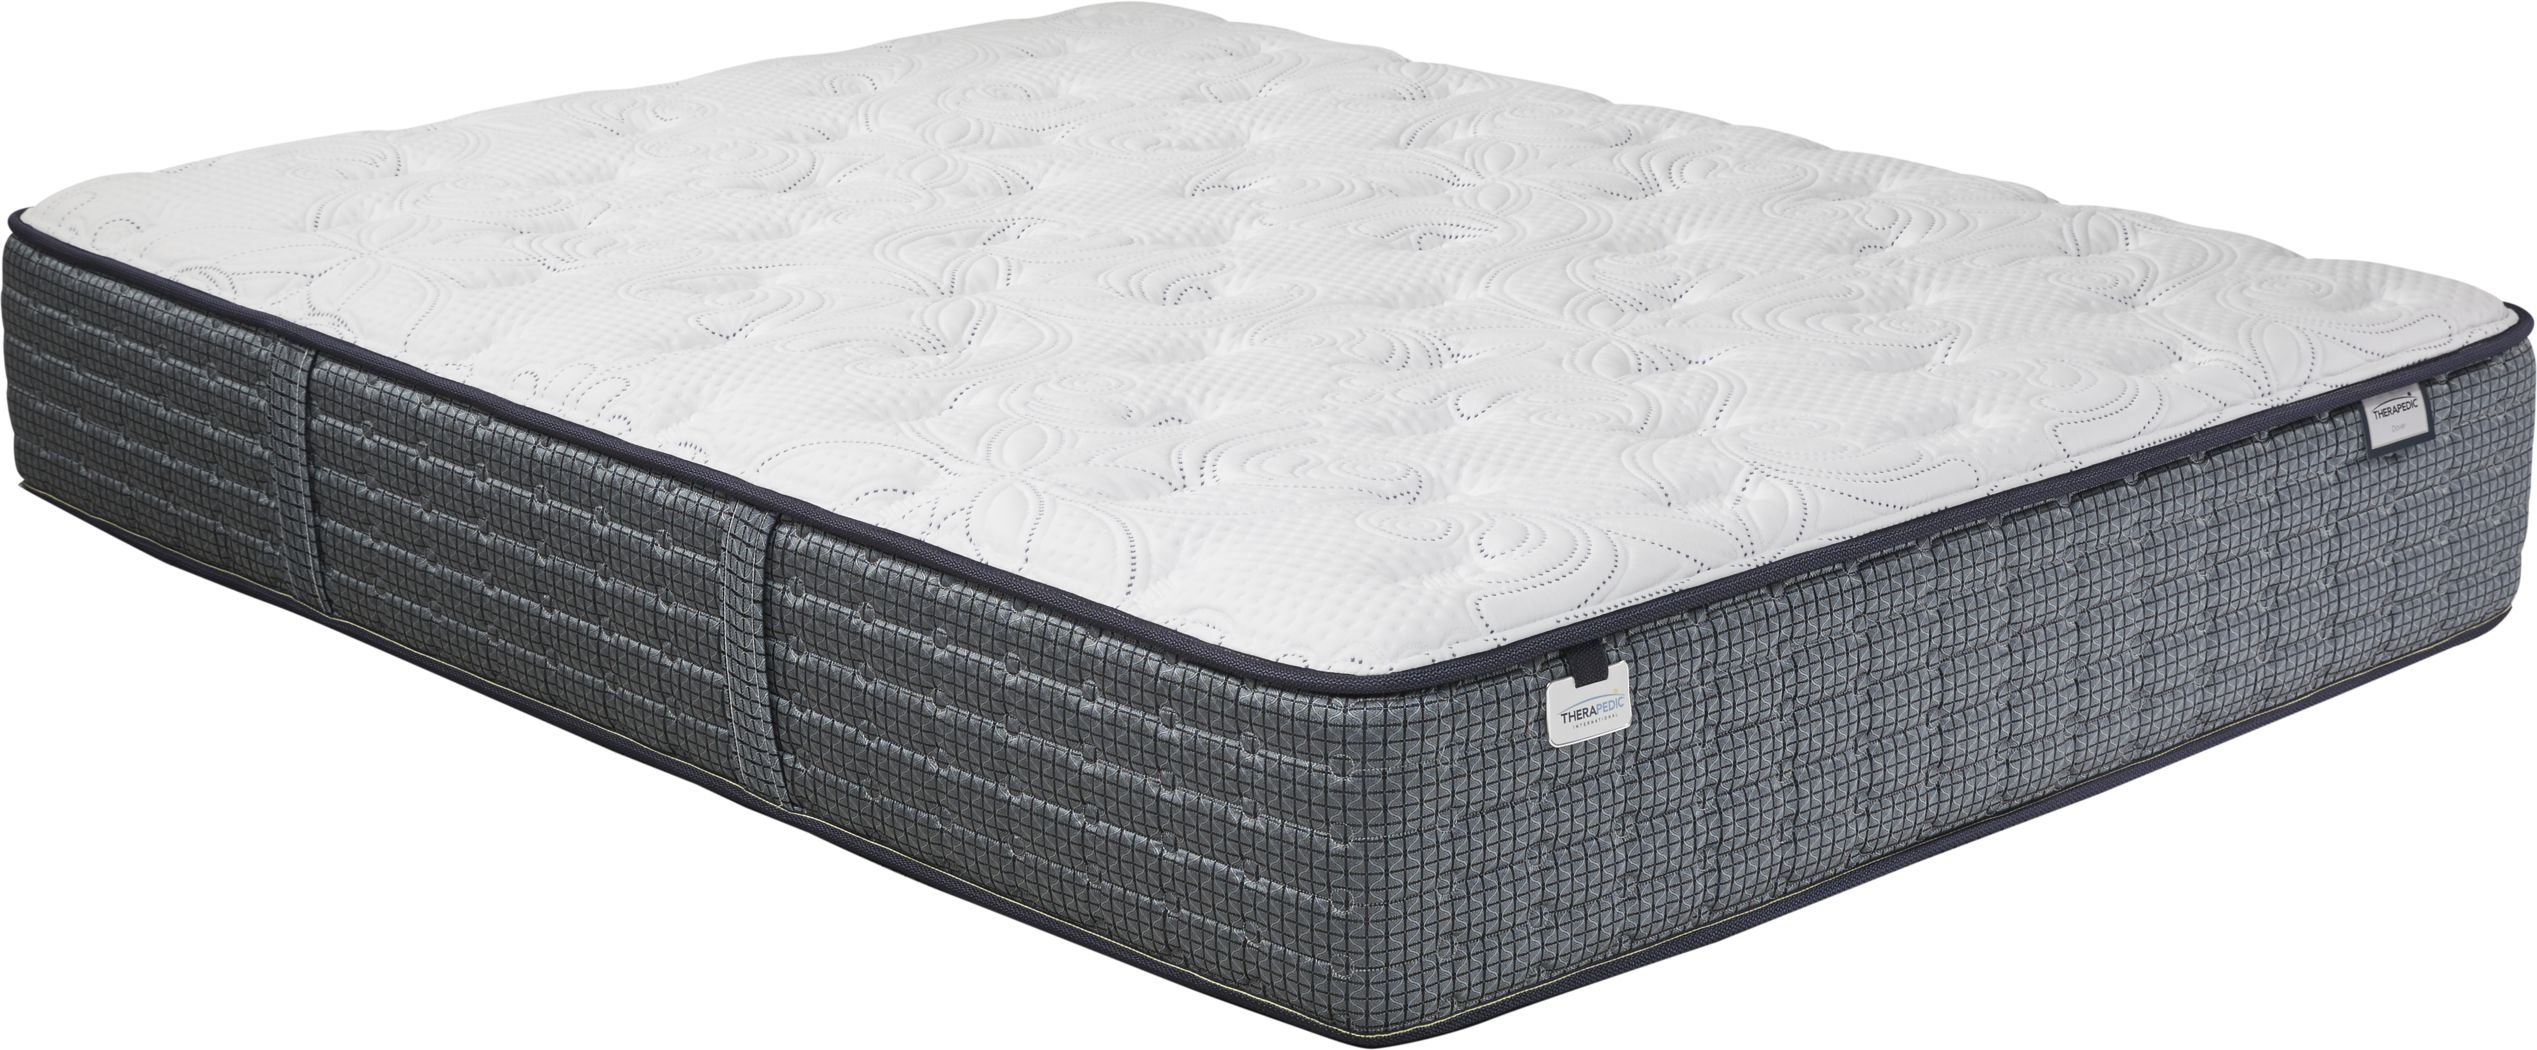 Top 77+ Charming therapedic helmsley king mattress reviews Not To Be Missed